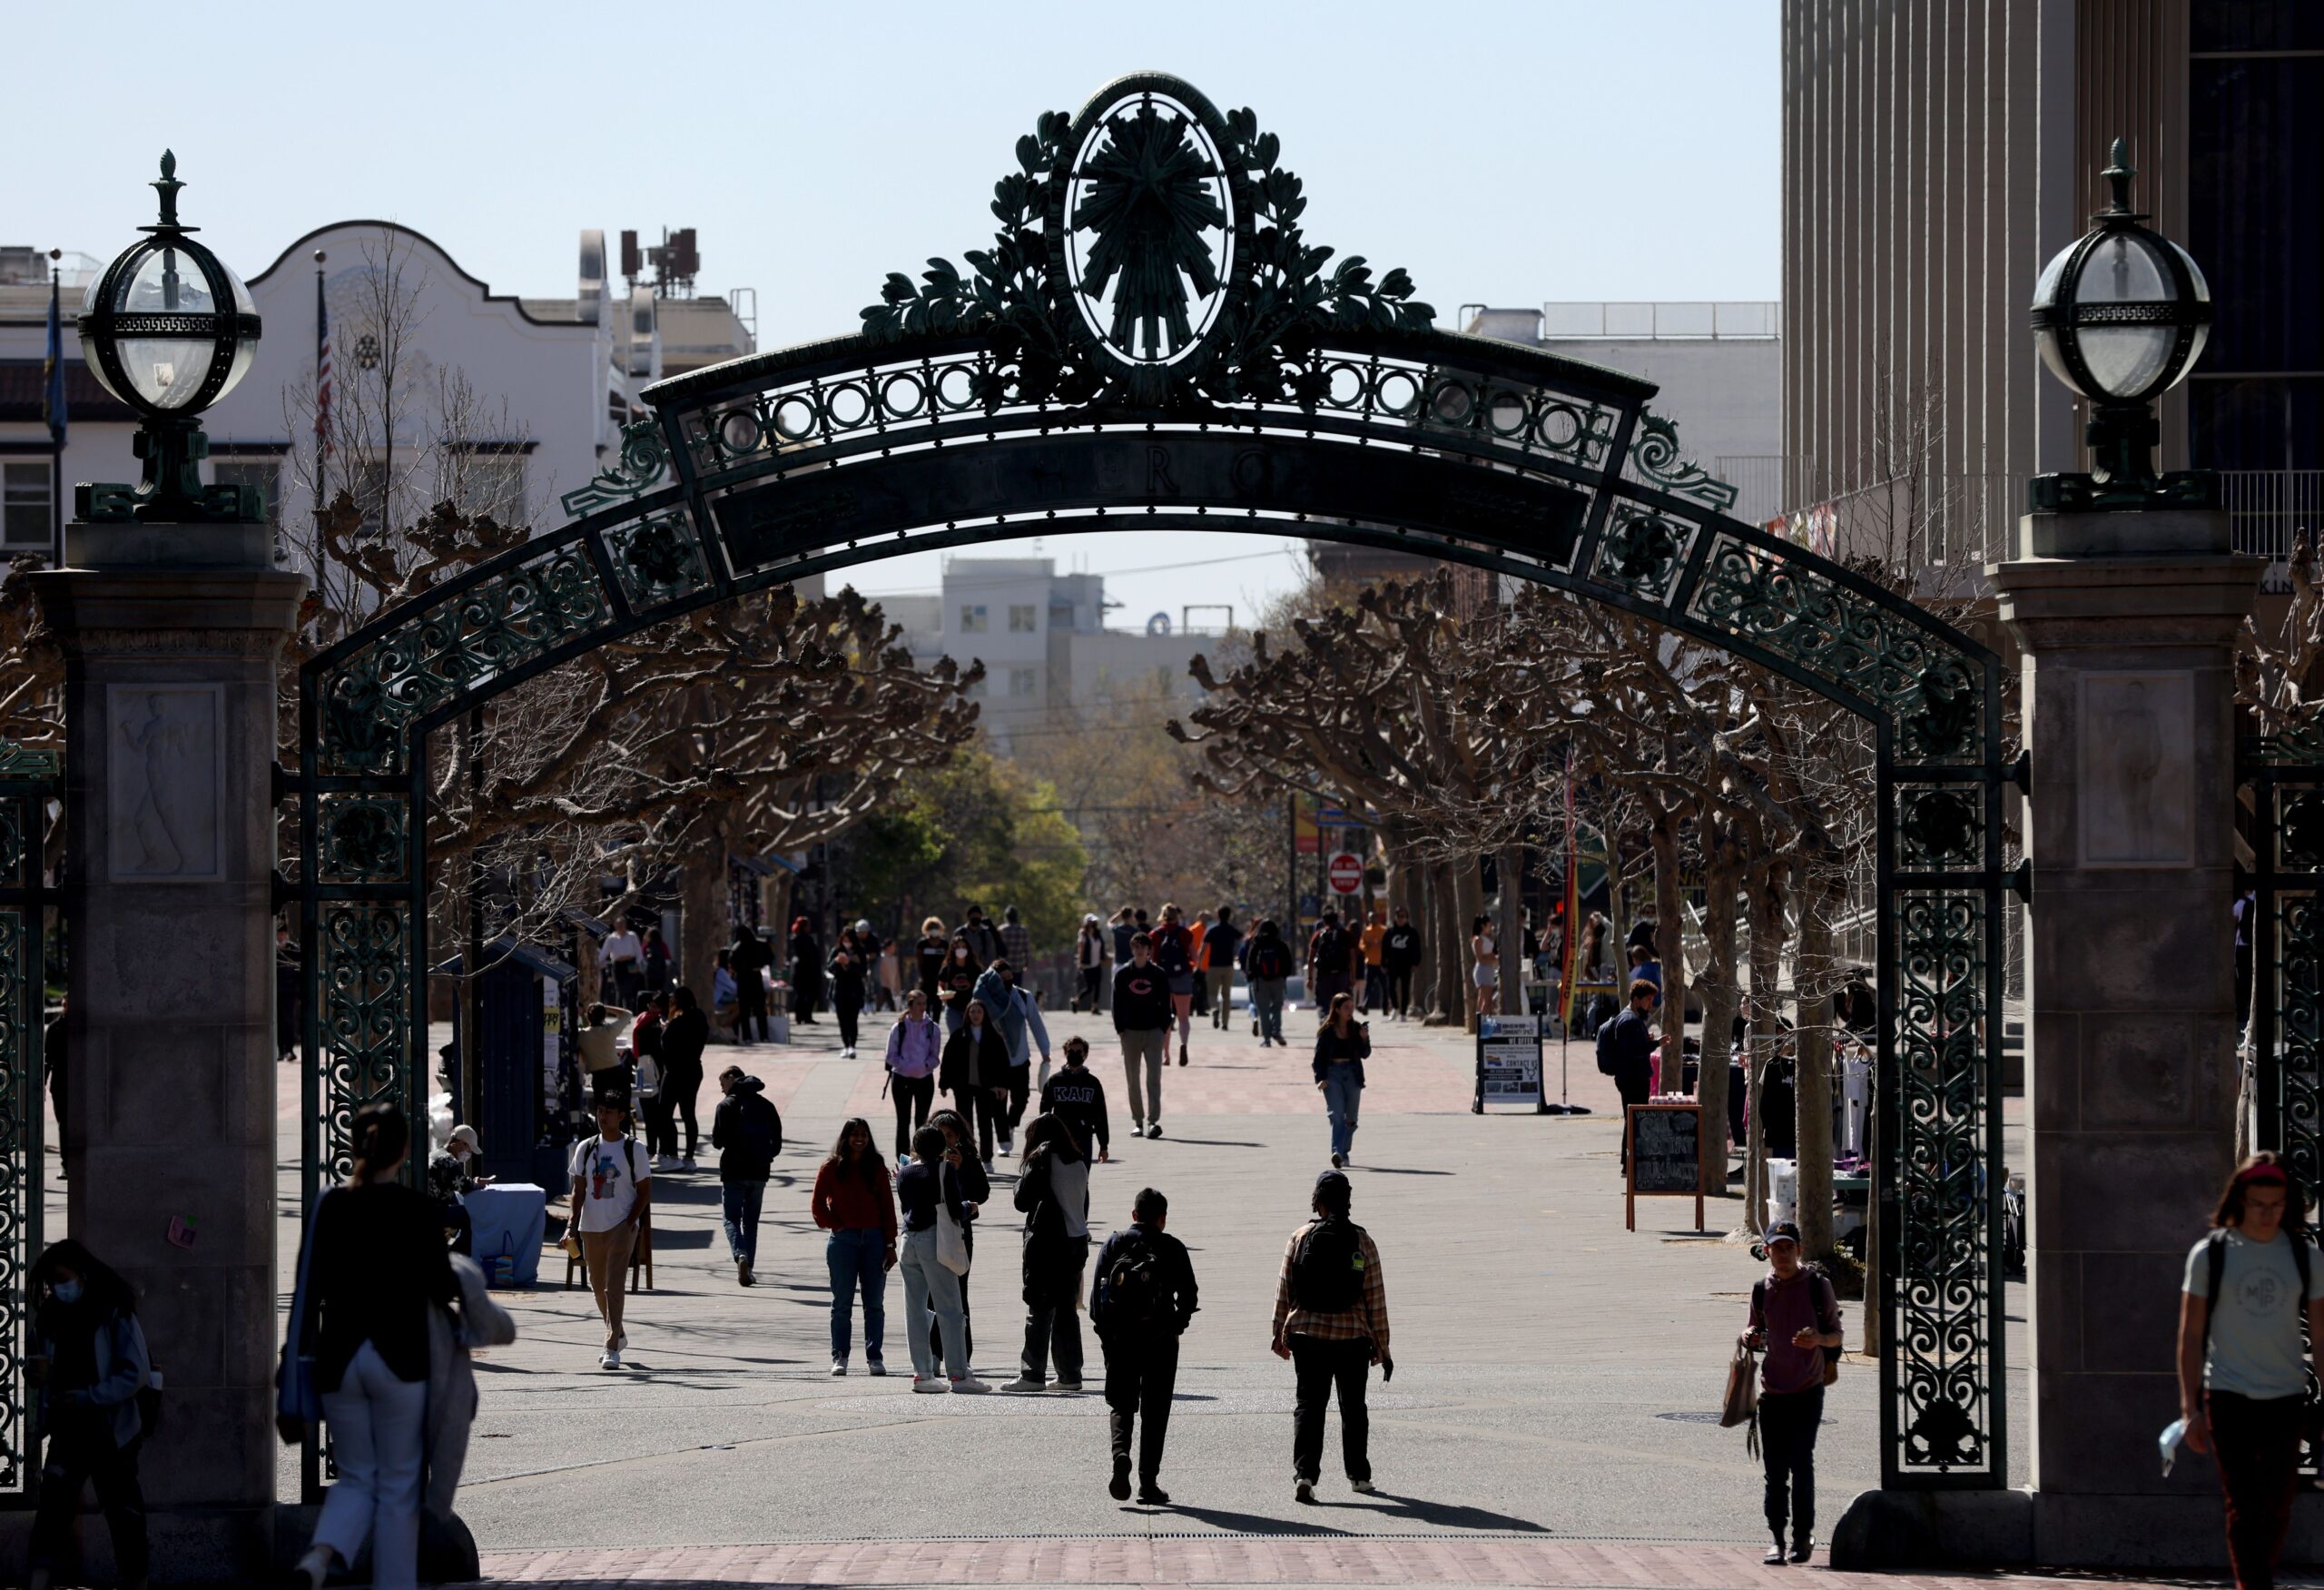 Congress requests documents from UC Berkeley in widening campus antisemitism investigation - Education - News